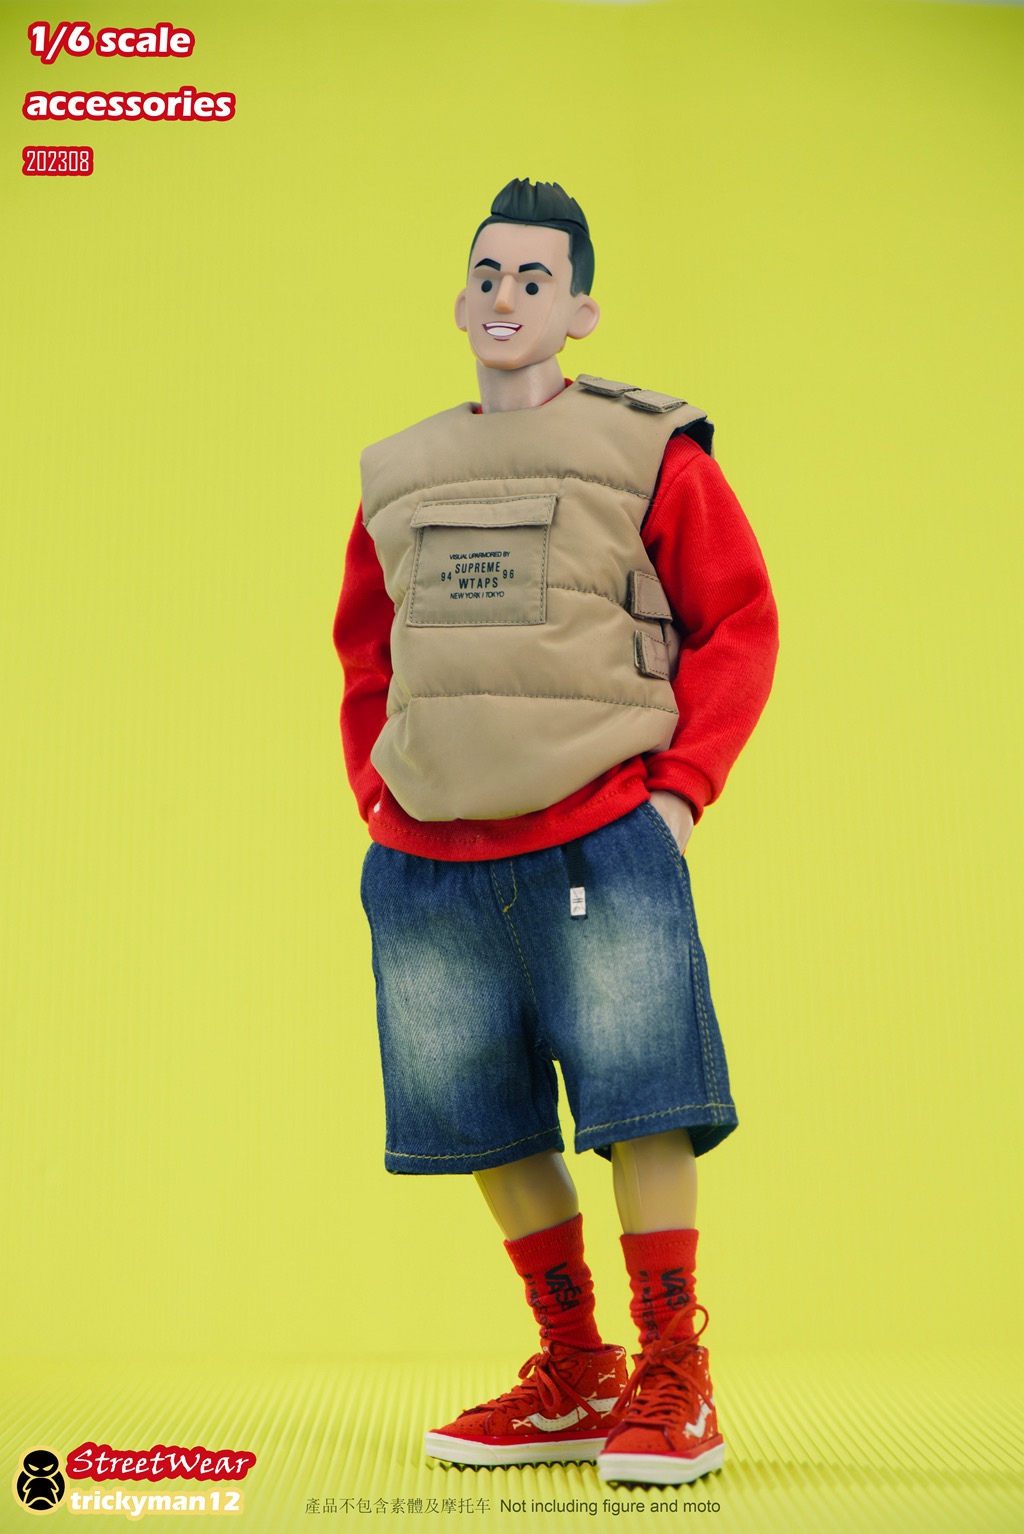 streetwear - NEW PRODUCT: TrickyMan12: 1/6th Scale StreetWear Clothes Set (#202308) 19262210